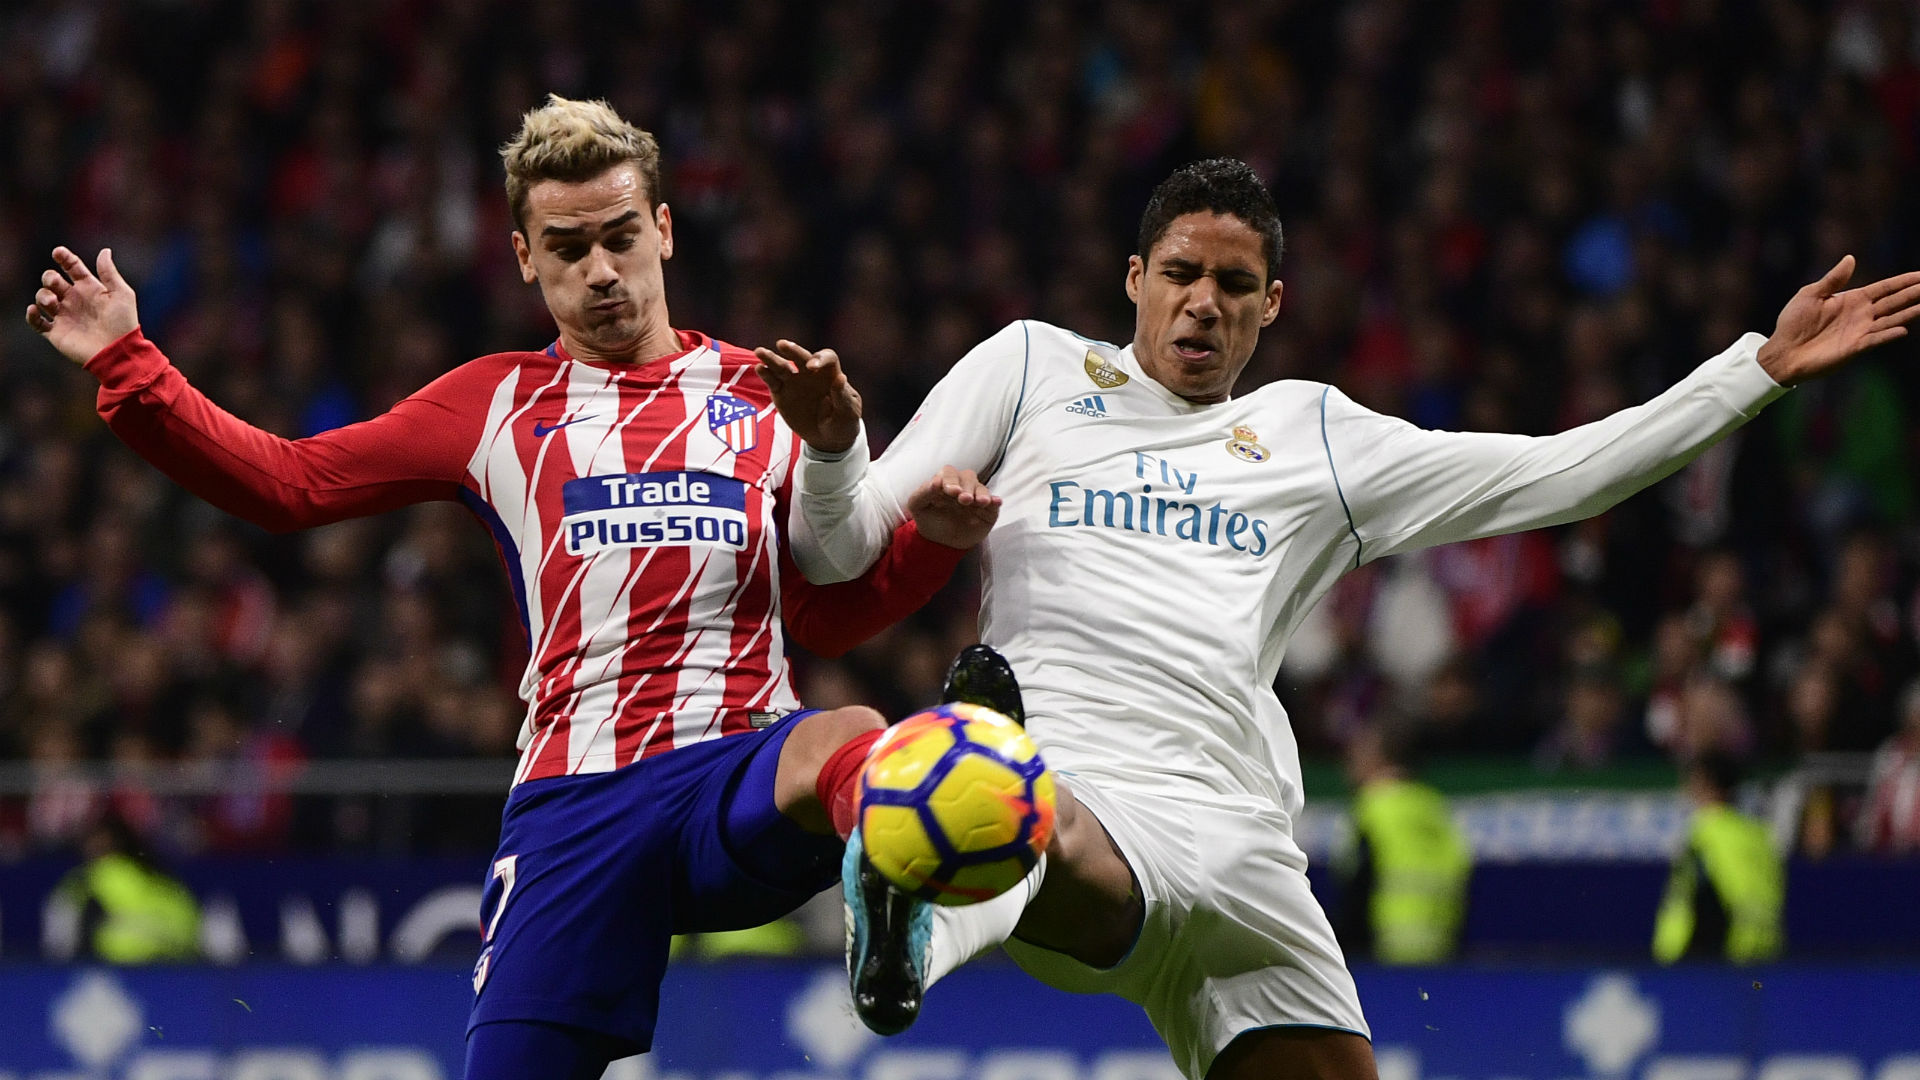 Real Madrid vs Atletico Madrid Winning Odds for the Match